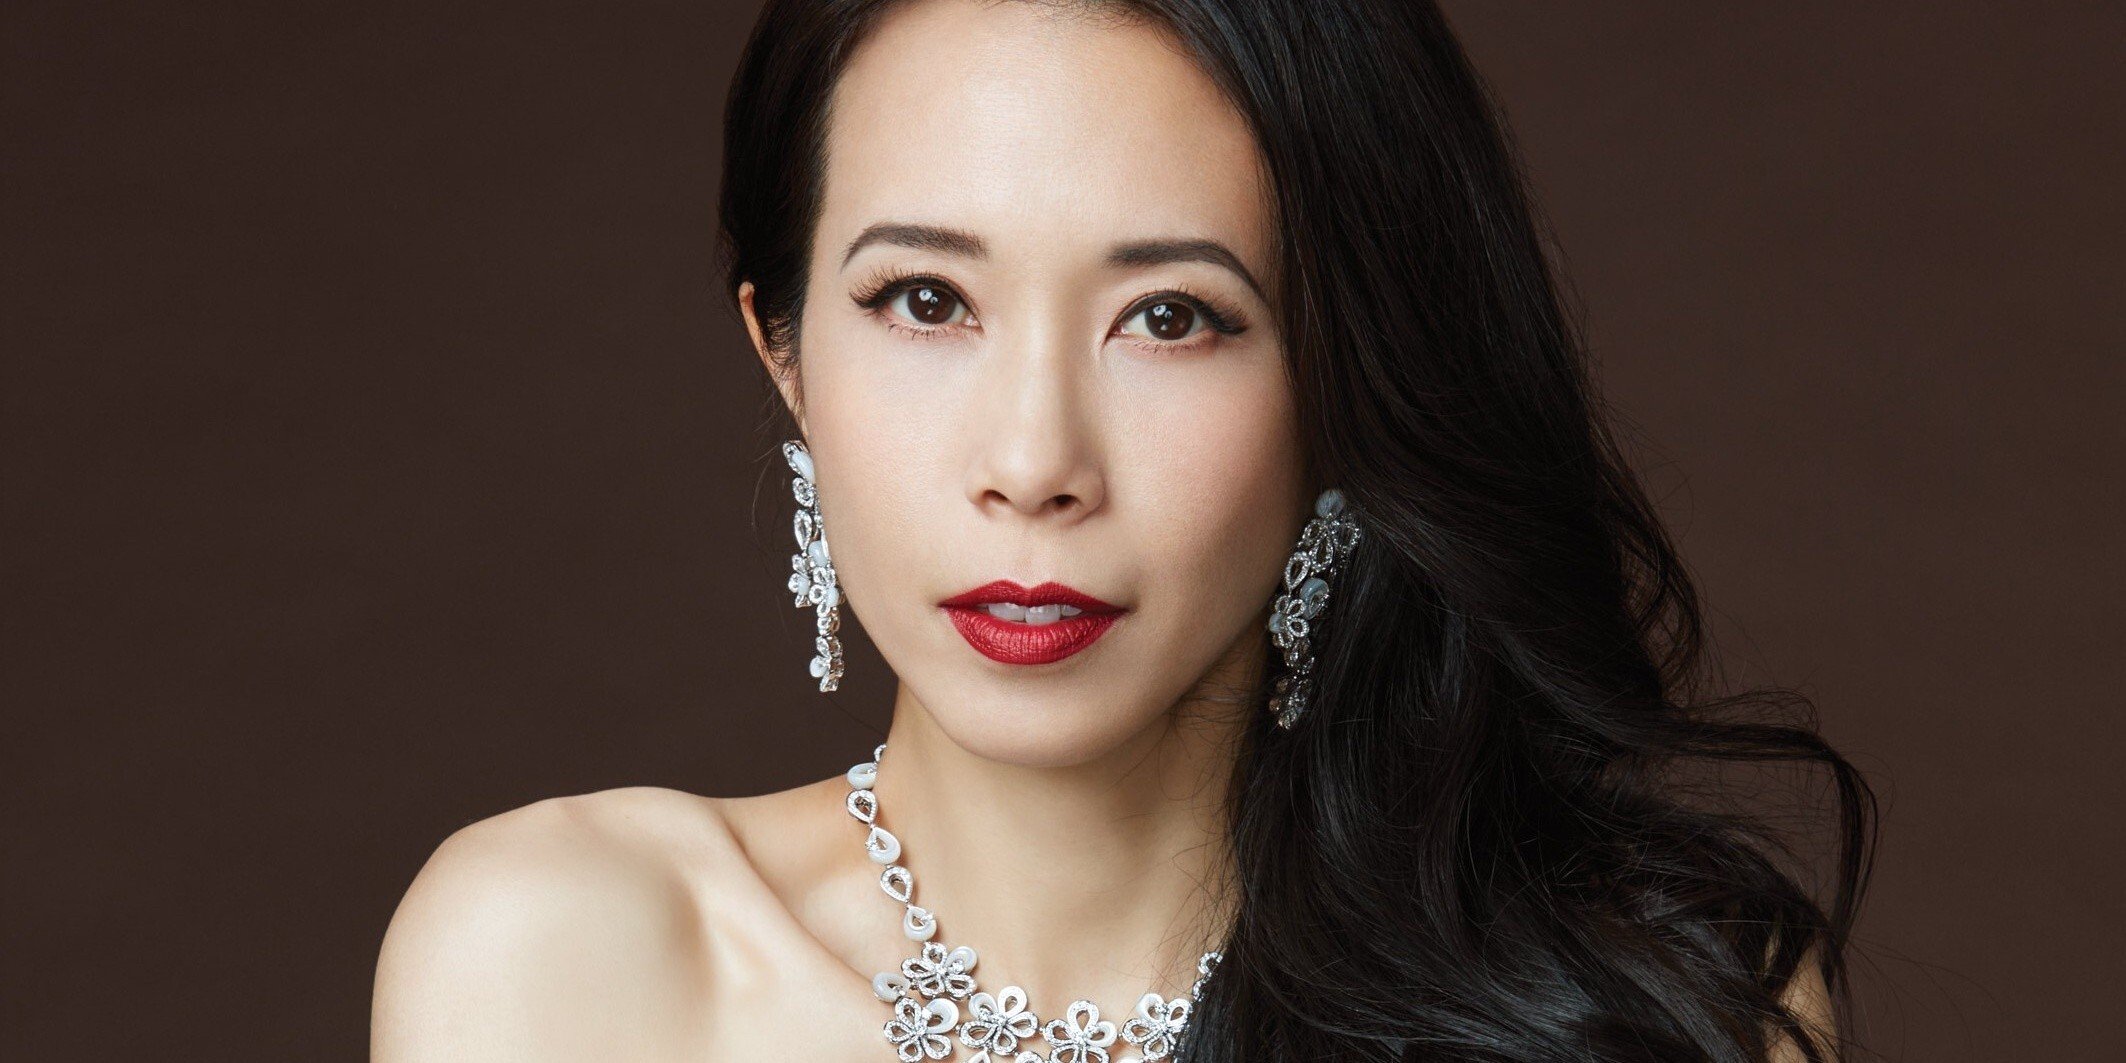 Karen Mok has attracted the ire of Chinese social media for praising the ban in Shenzhen on eating dogs and cats.